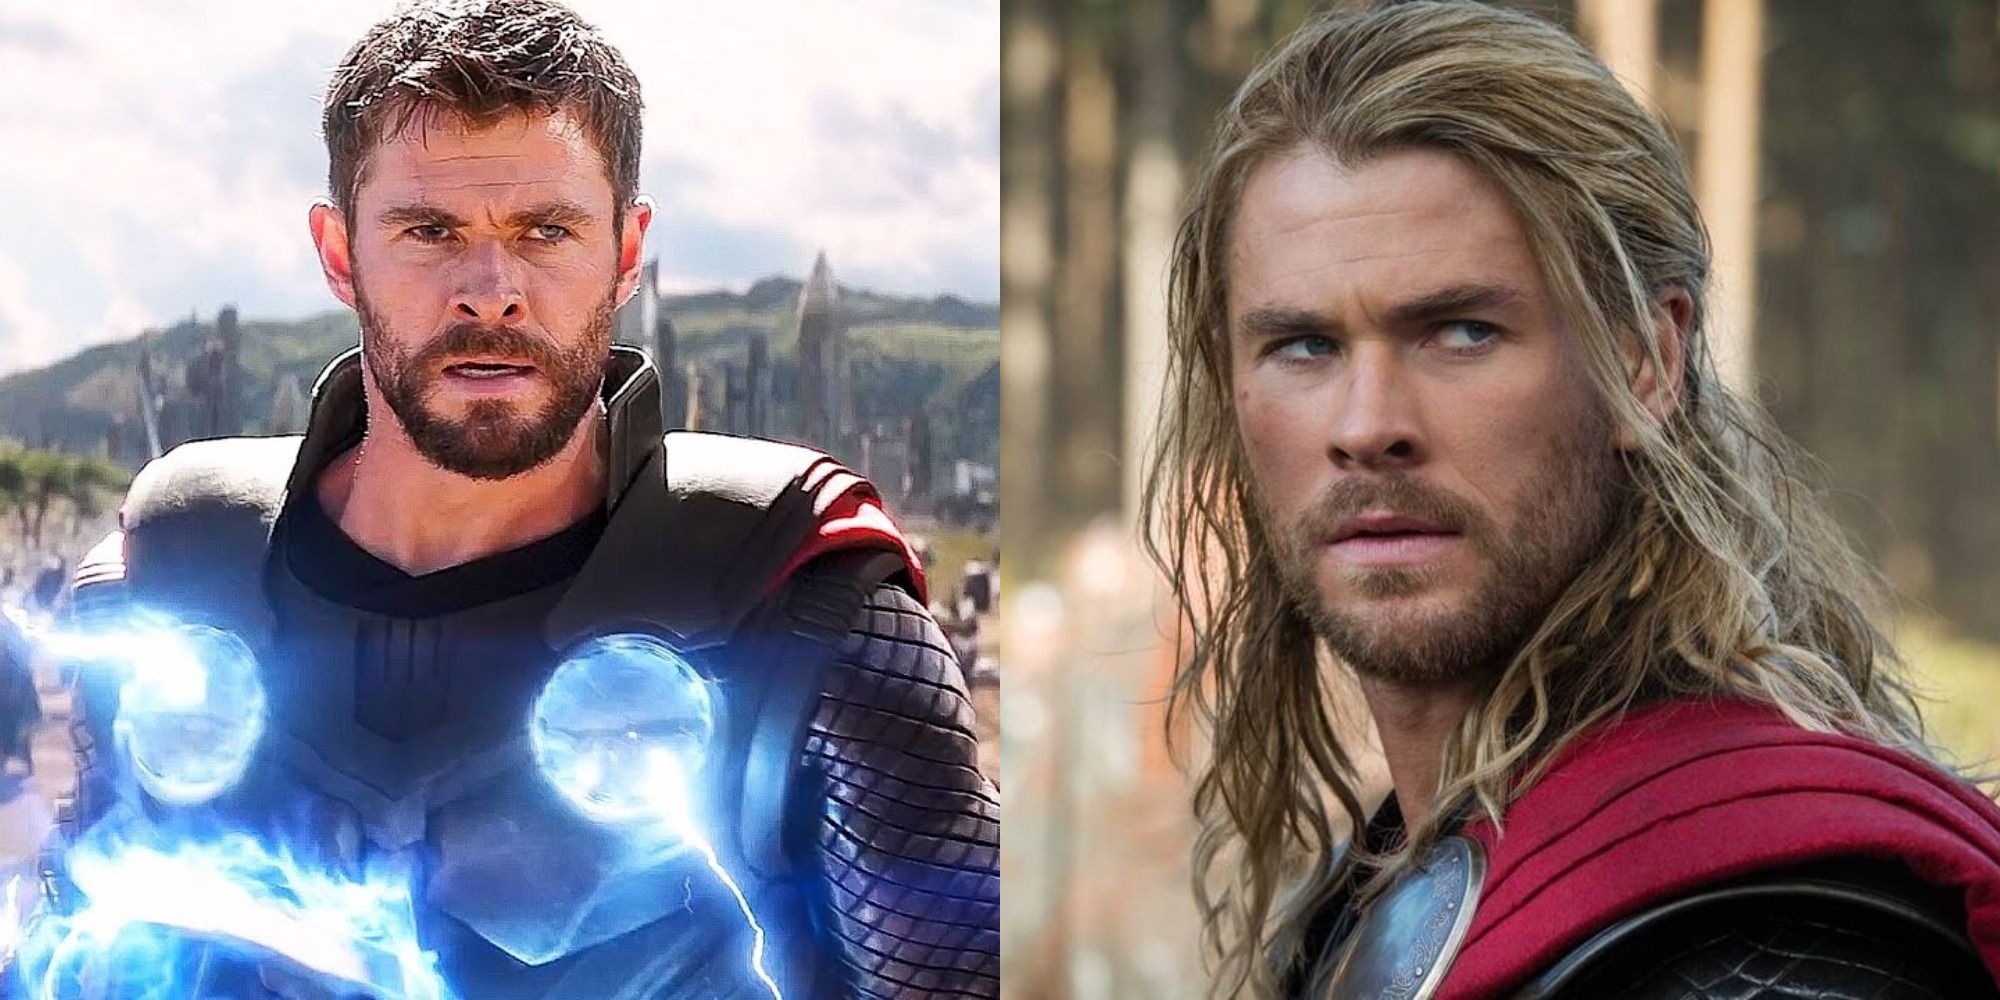 Split image showing Thor in Infinity War and in The Dark World